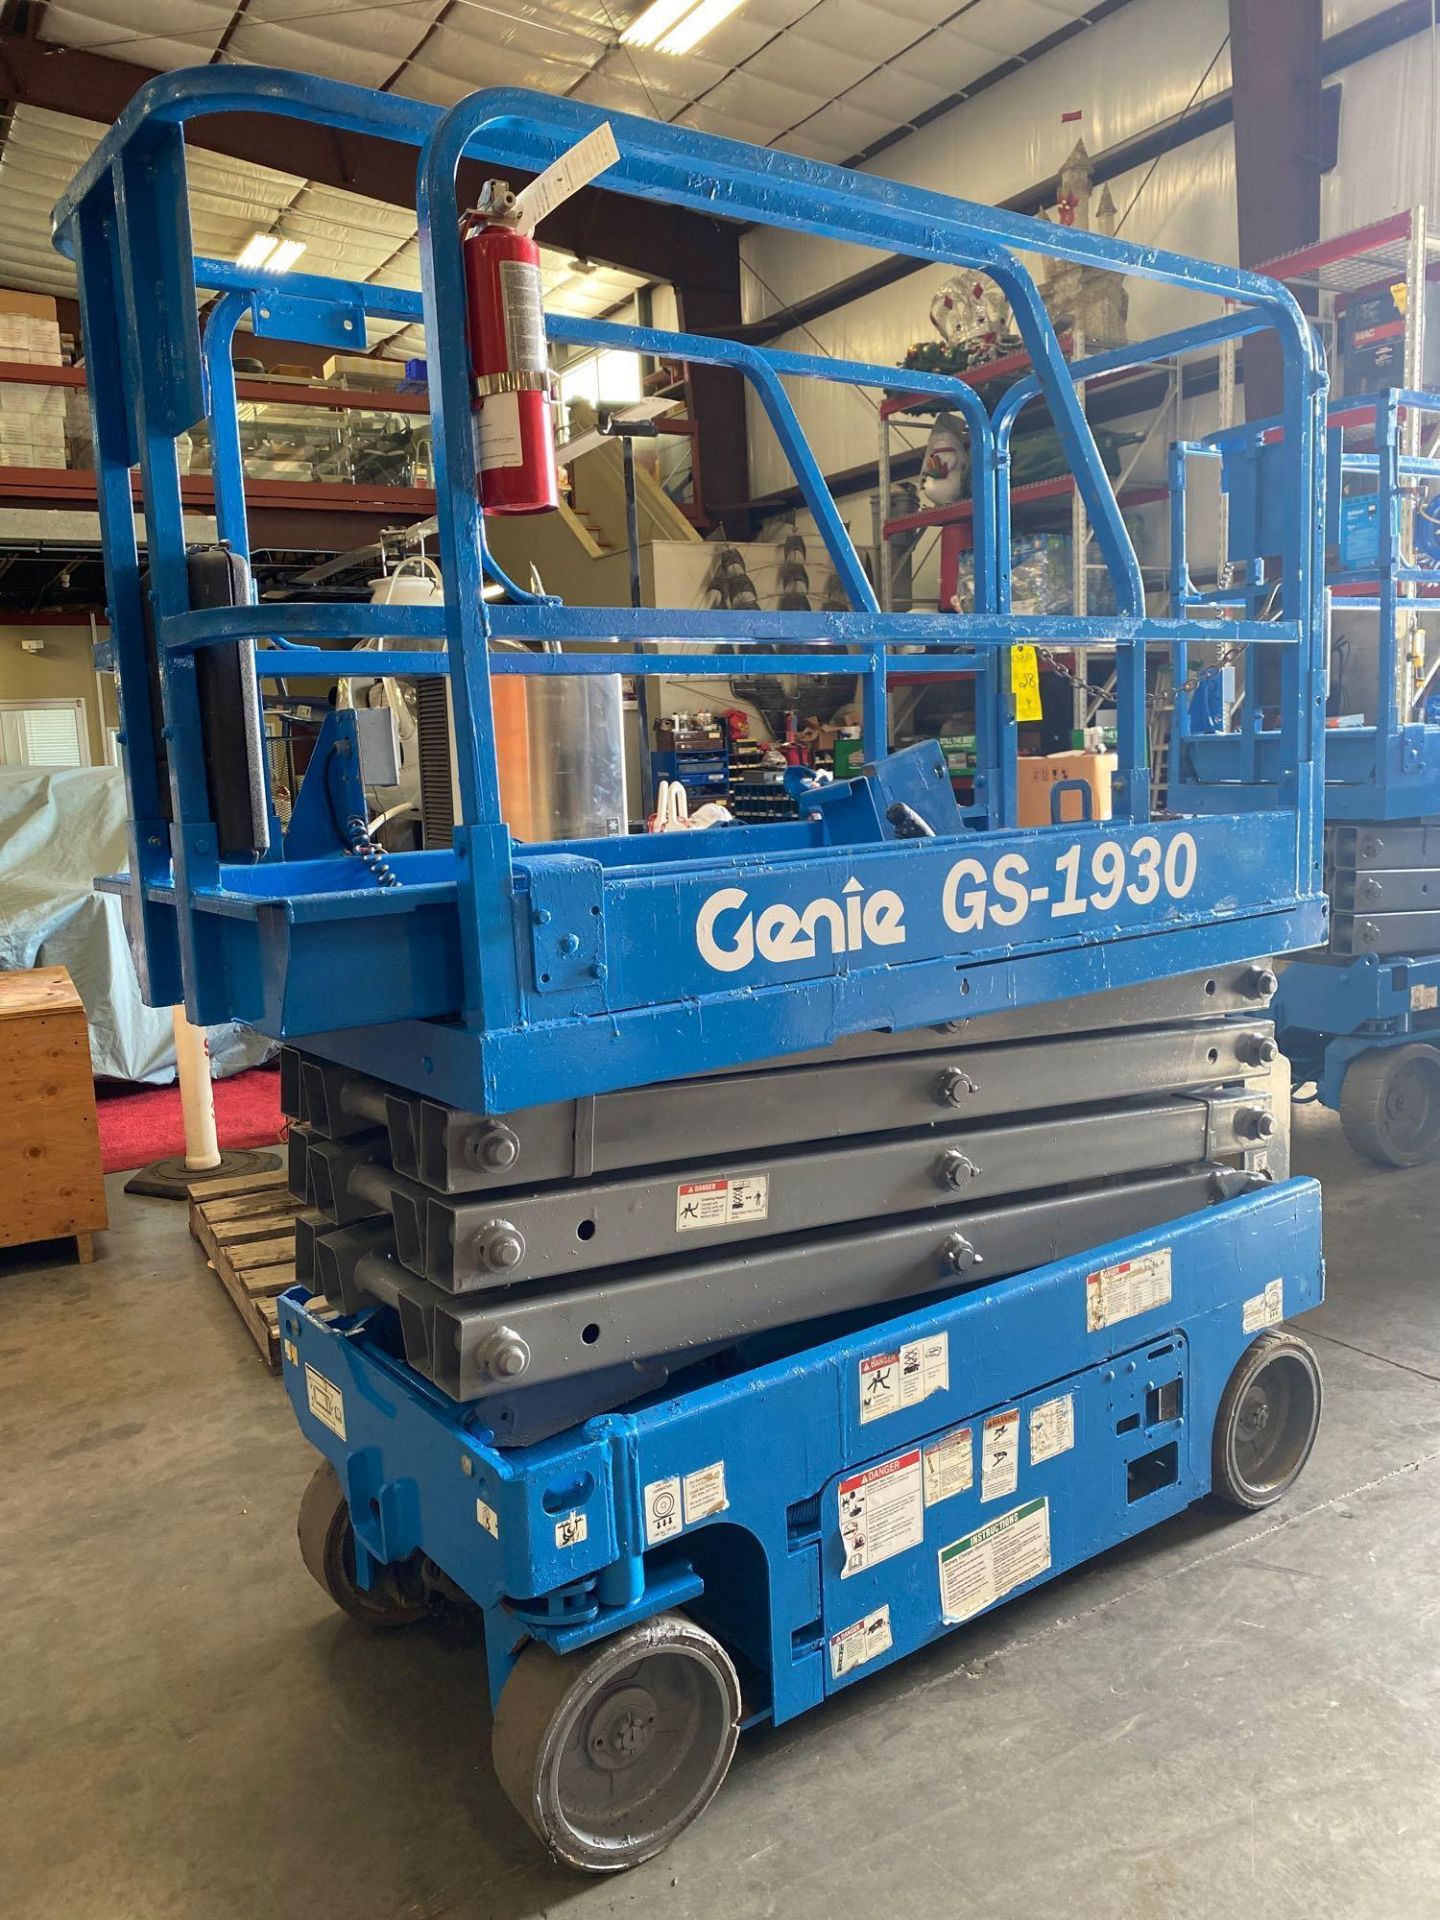 2014 GENIE GS-1930 ELECTRIC SCISSOR LIFT, 19' PLATFORM HEIGHT, BUILT IN BATTERY CHARGER - Image 2 of 10